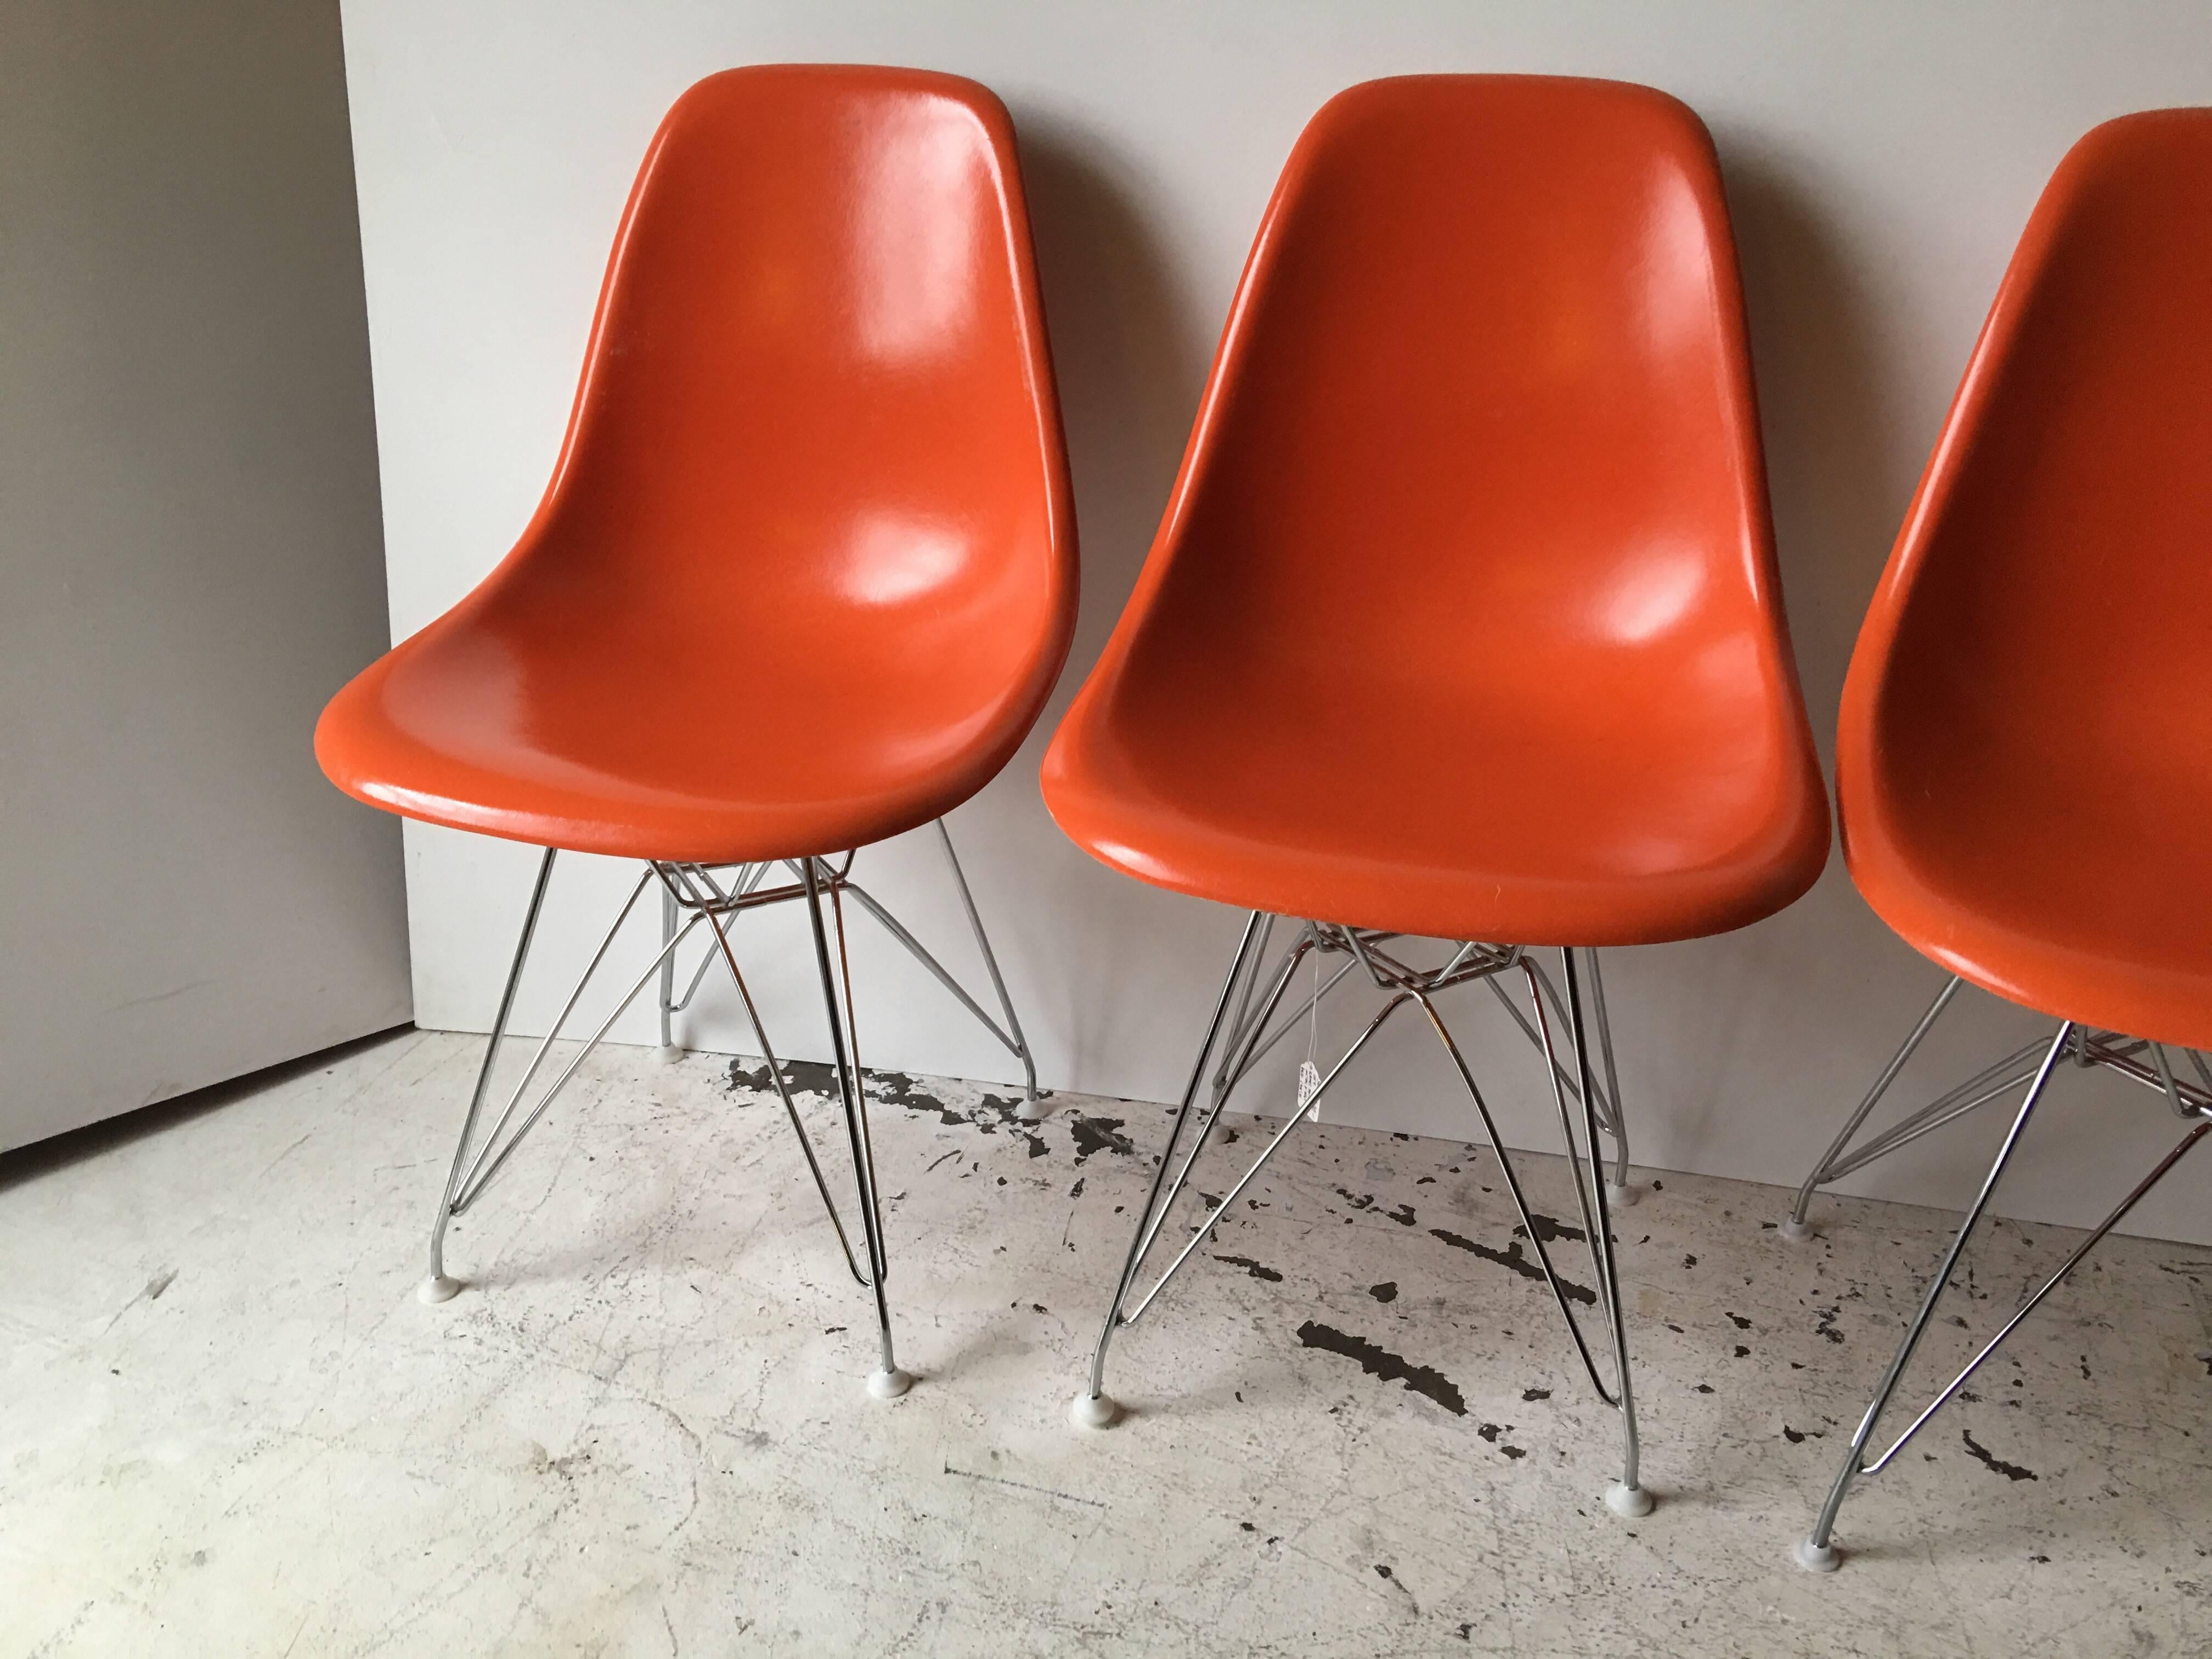 Herman Miller Charles Eames Chairs In Good Condition For Sale In Tulsa, OK